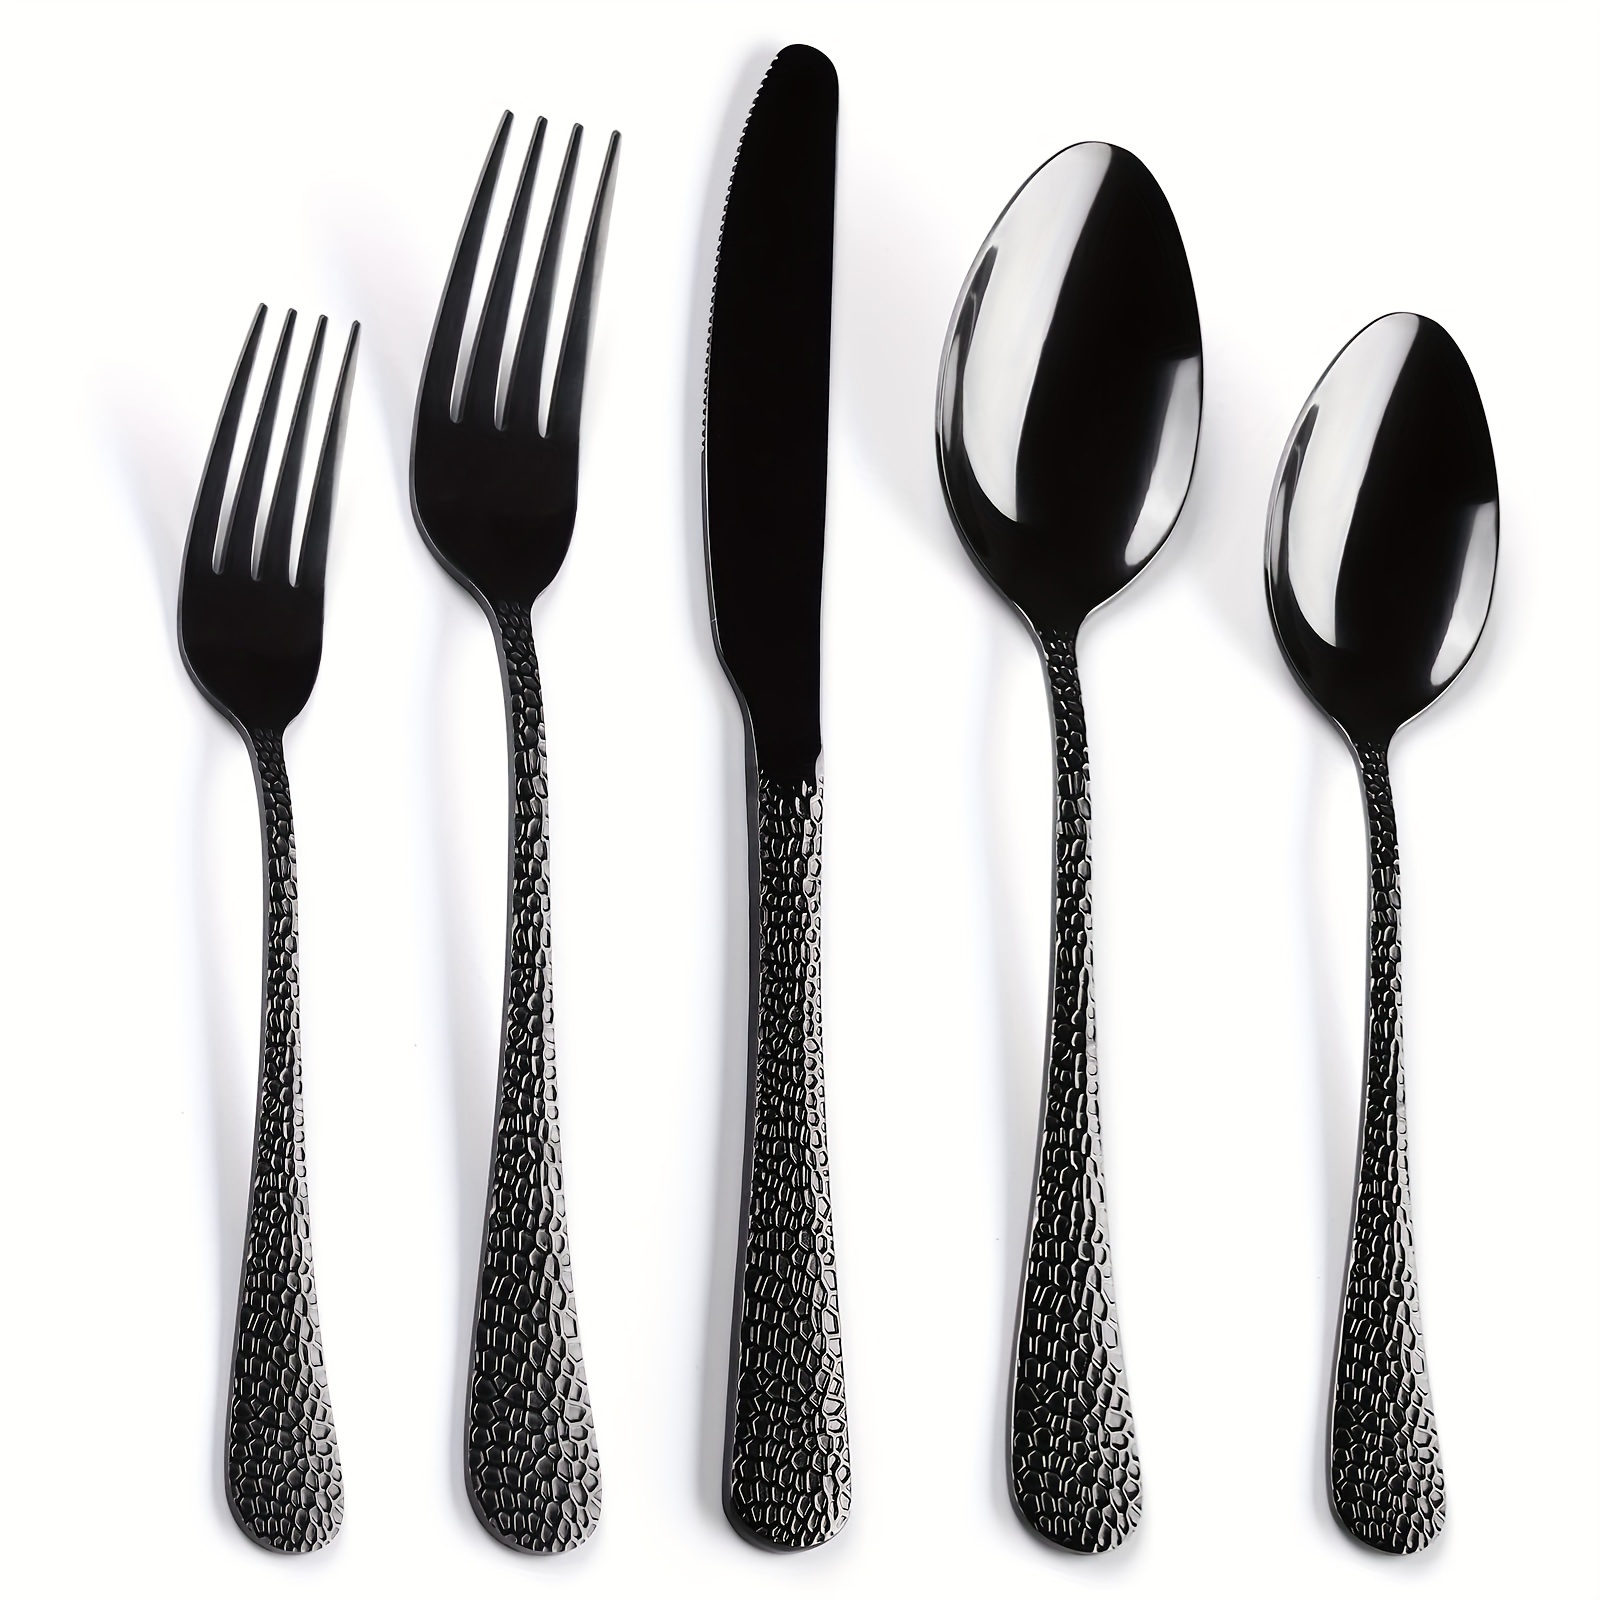 

40 Piece Modern Hammered Flatware Set, Black Silverware Set With Luxury Decoration, Stainless Steel Cutlery Utensils Service For 4, Include Knife Fork Spoon, Mirror, Reusable Dishwasher Safe